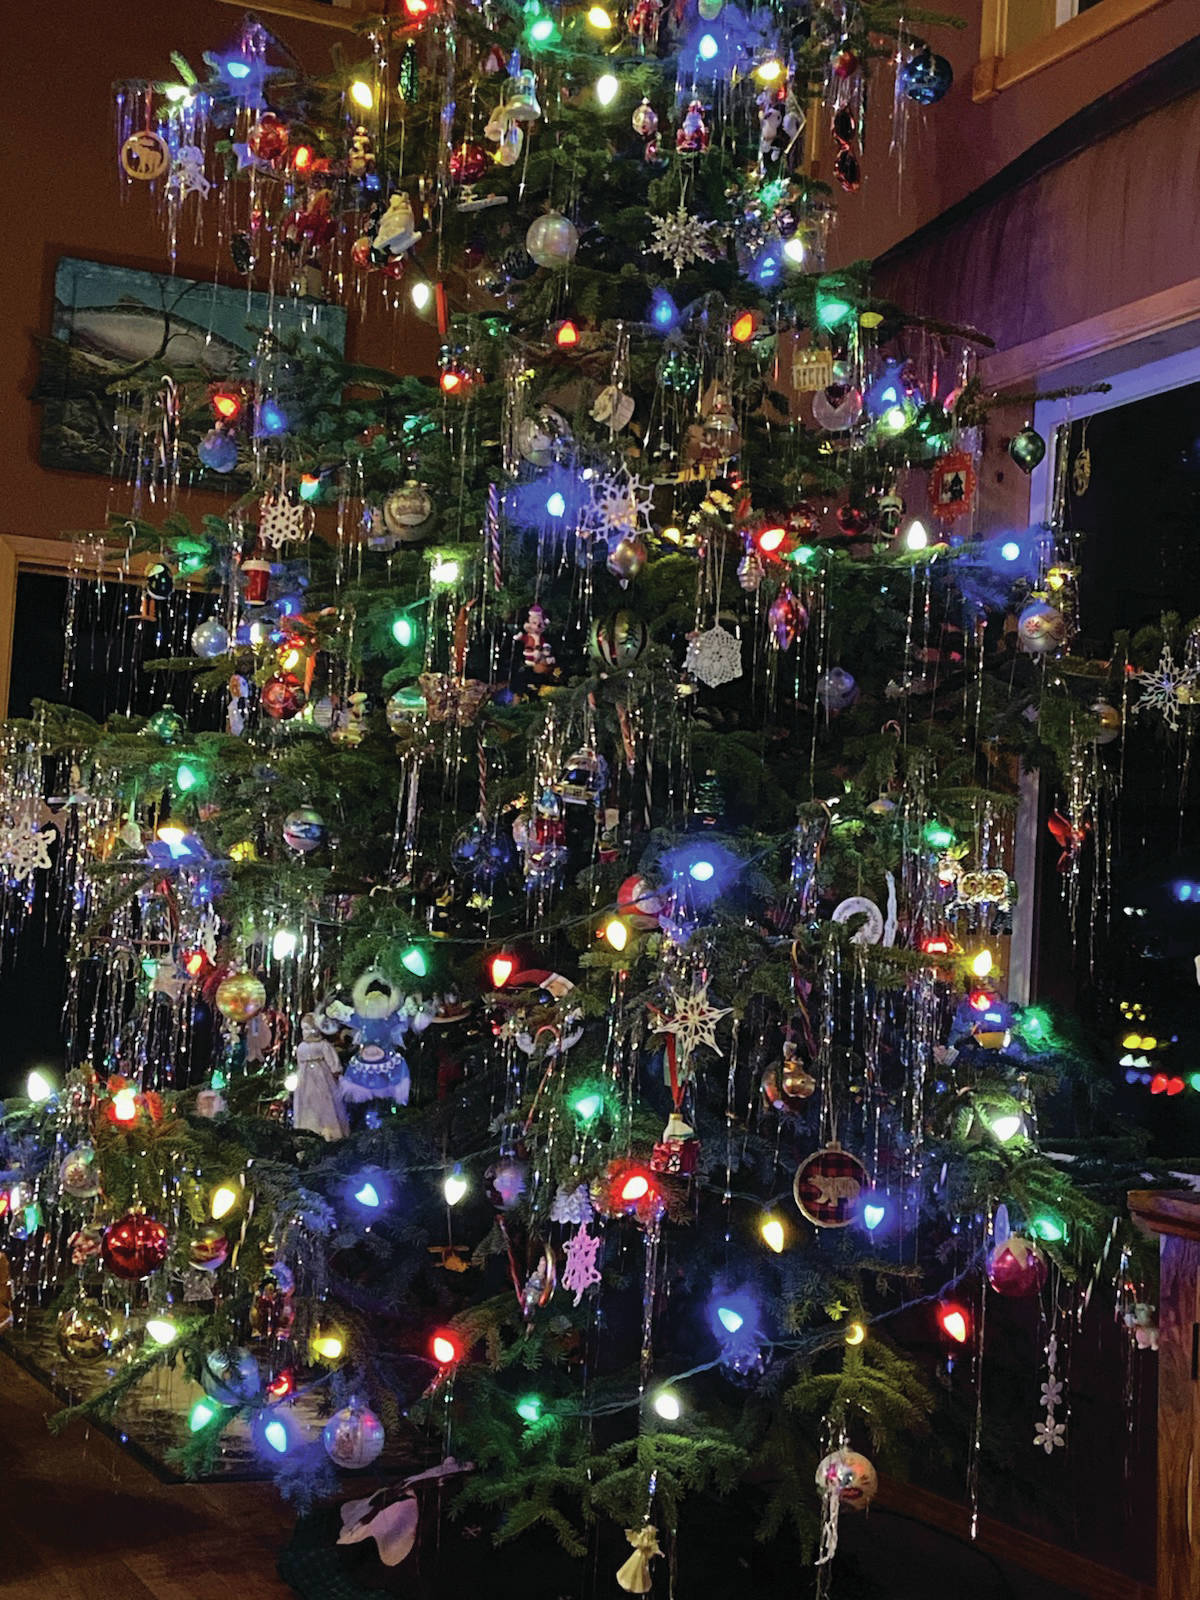 The Christmas tree at Teri Robl’s home brings some cheer to the holidays, as seen here in this photo taken Dec. 9, 2019, in Homer, Alaska. (Photo by Teri Robl)